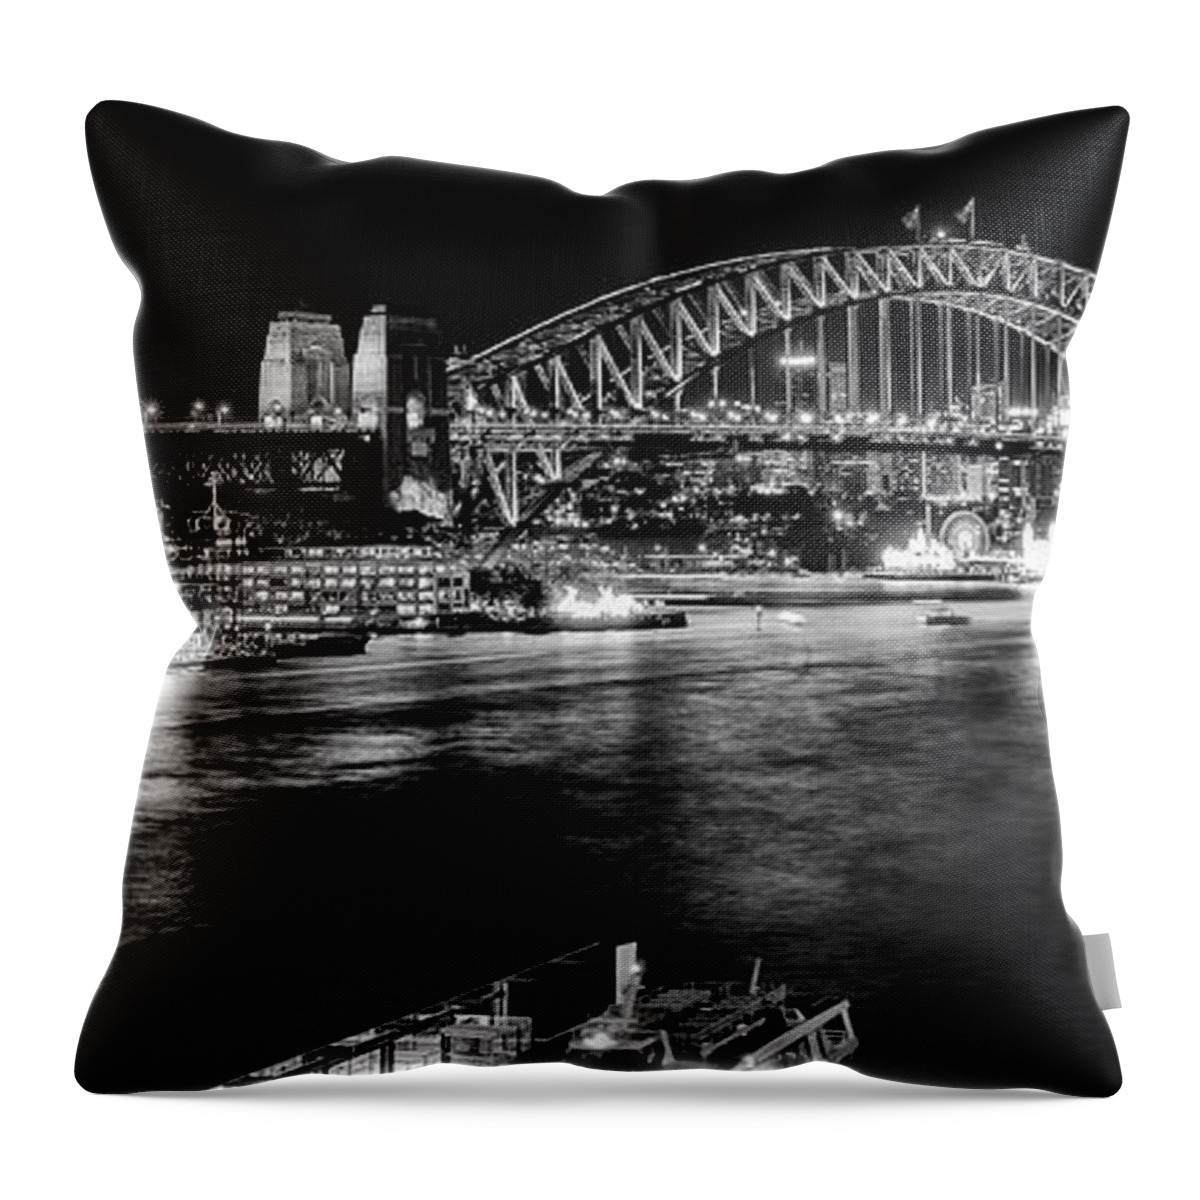 Landscape Throw Pillow featuring the photograph Sydney - Circular Quay by Chris Cousins